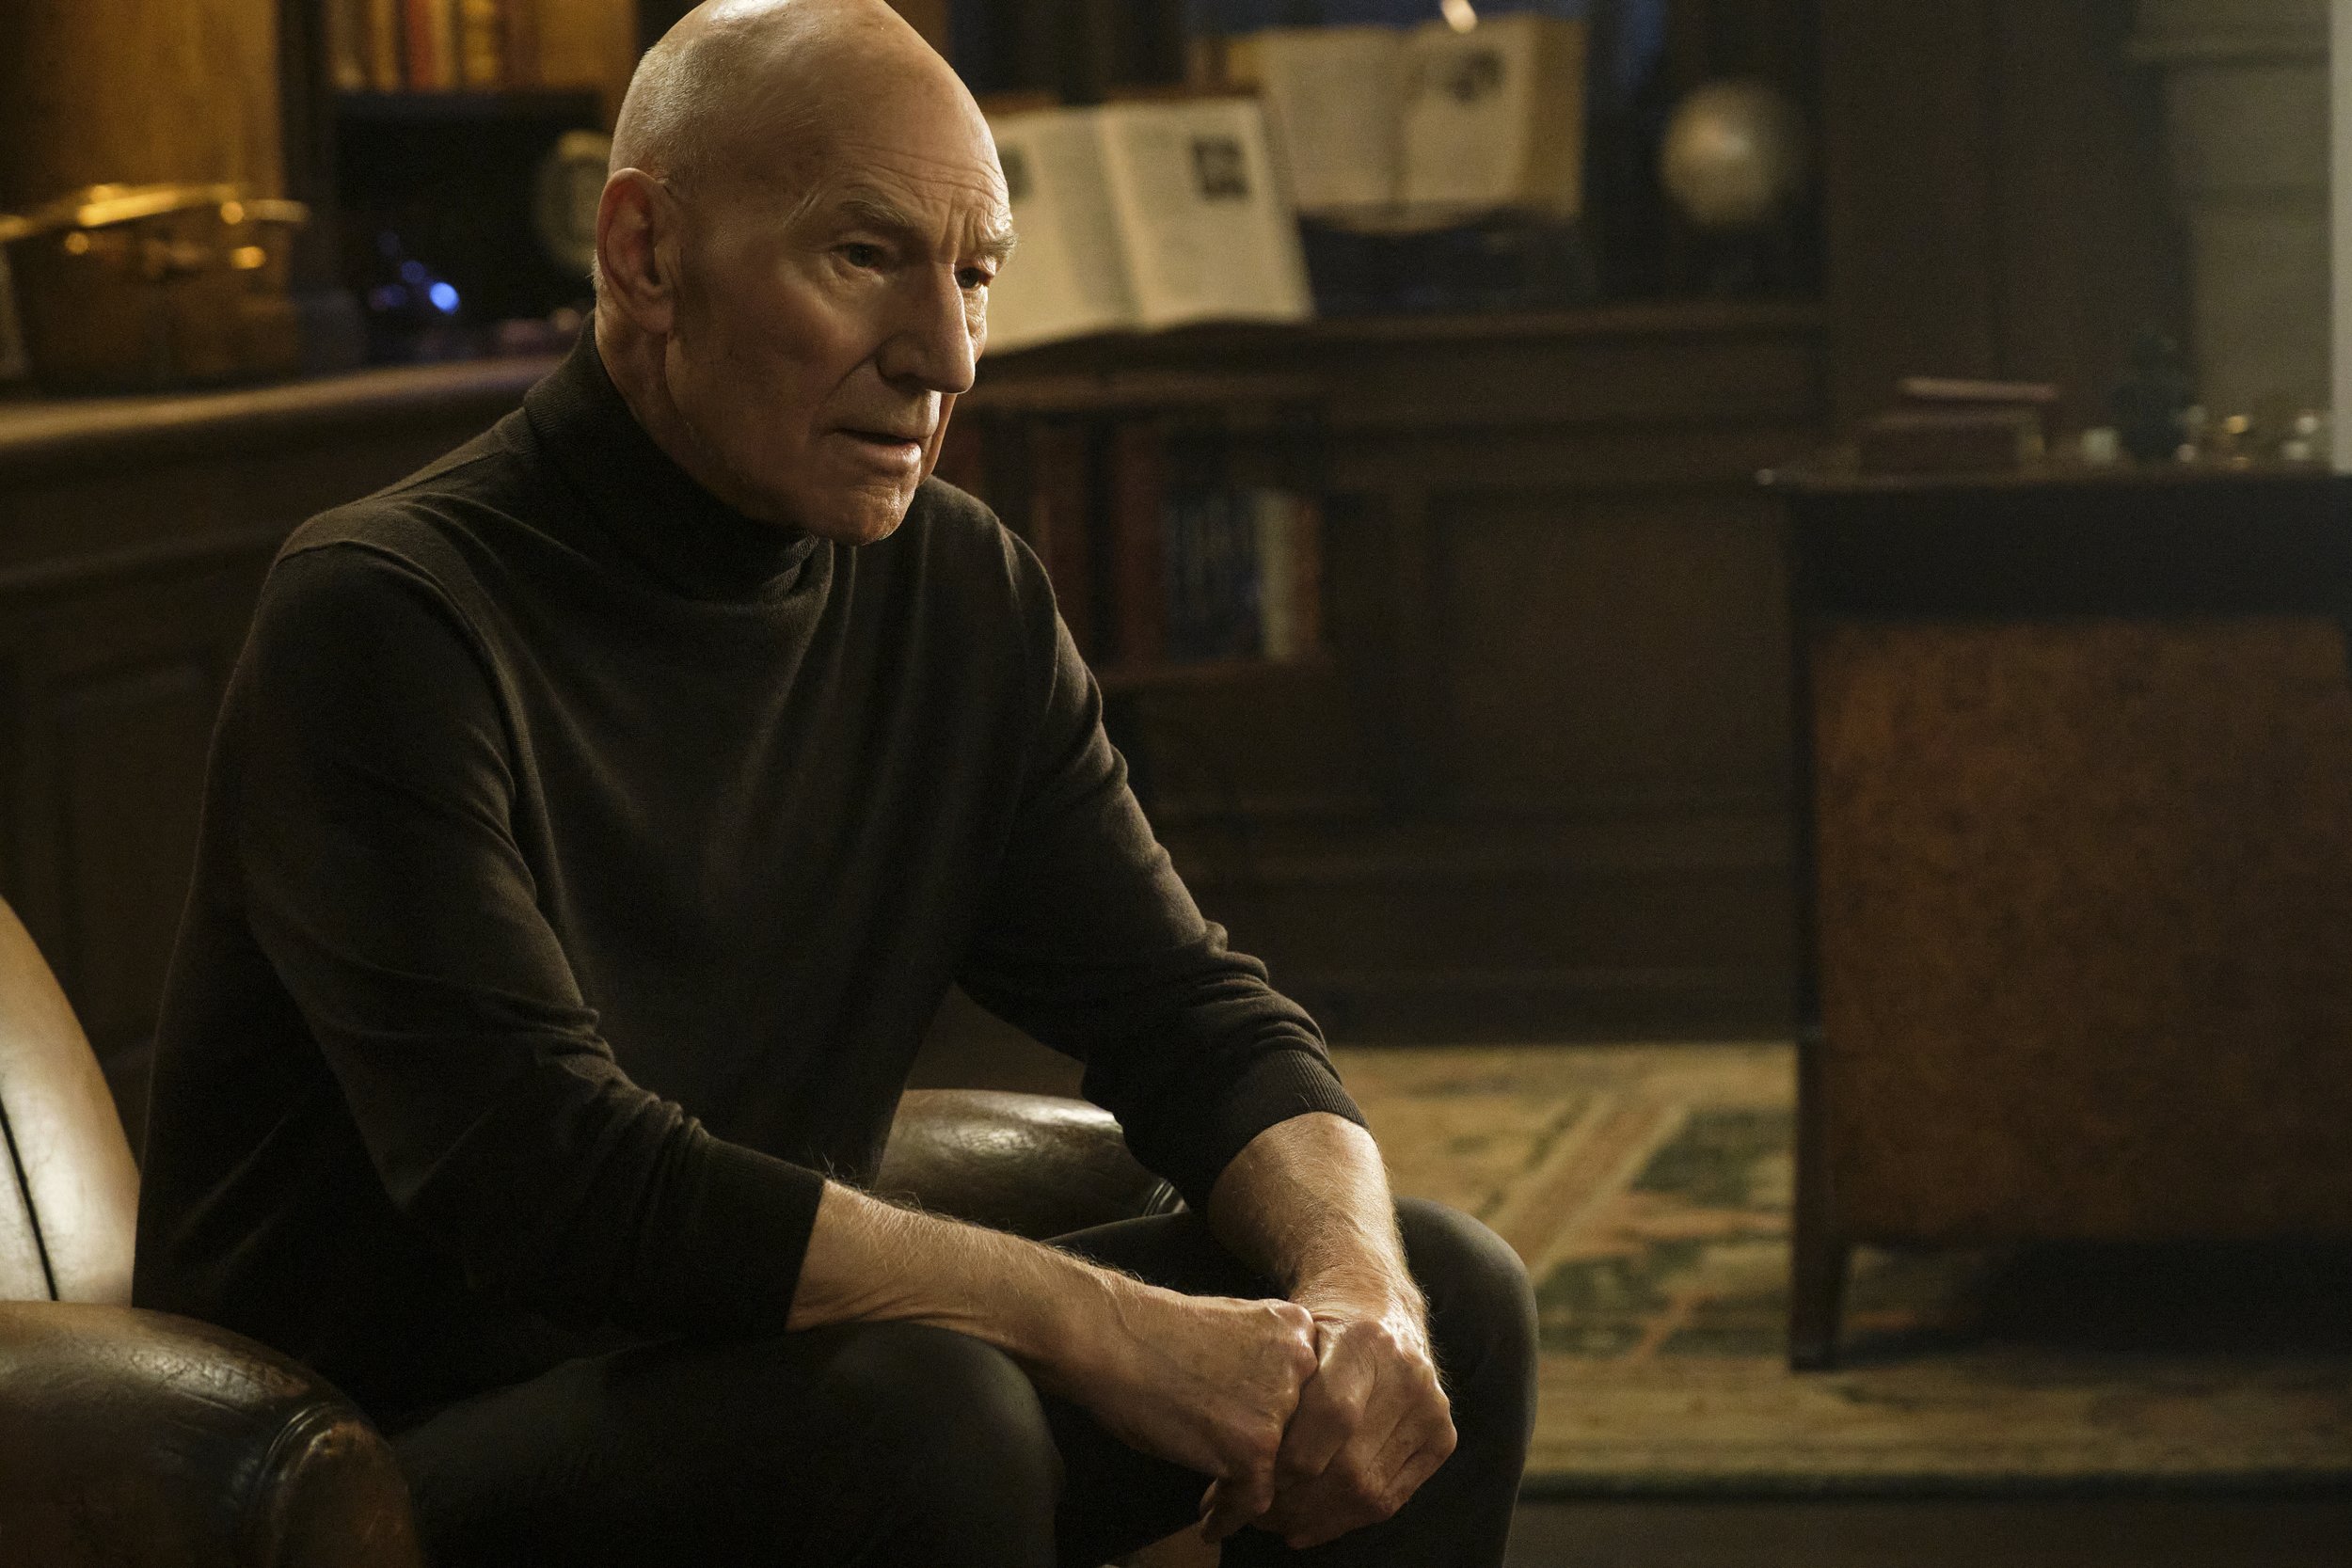   Pictured: Sir Patrick Stewart as Jean-Luc Picard of the Paramount+ original series STAR TREK: PICARD. Photo Cr: Trae Patton/Paramount+ (C)2022 ViacomCBS. All Rights Reserved.  